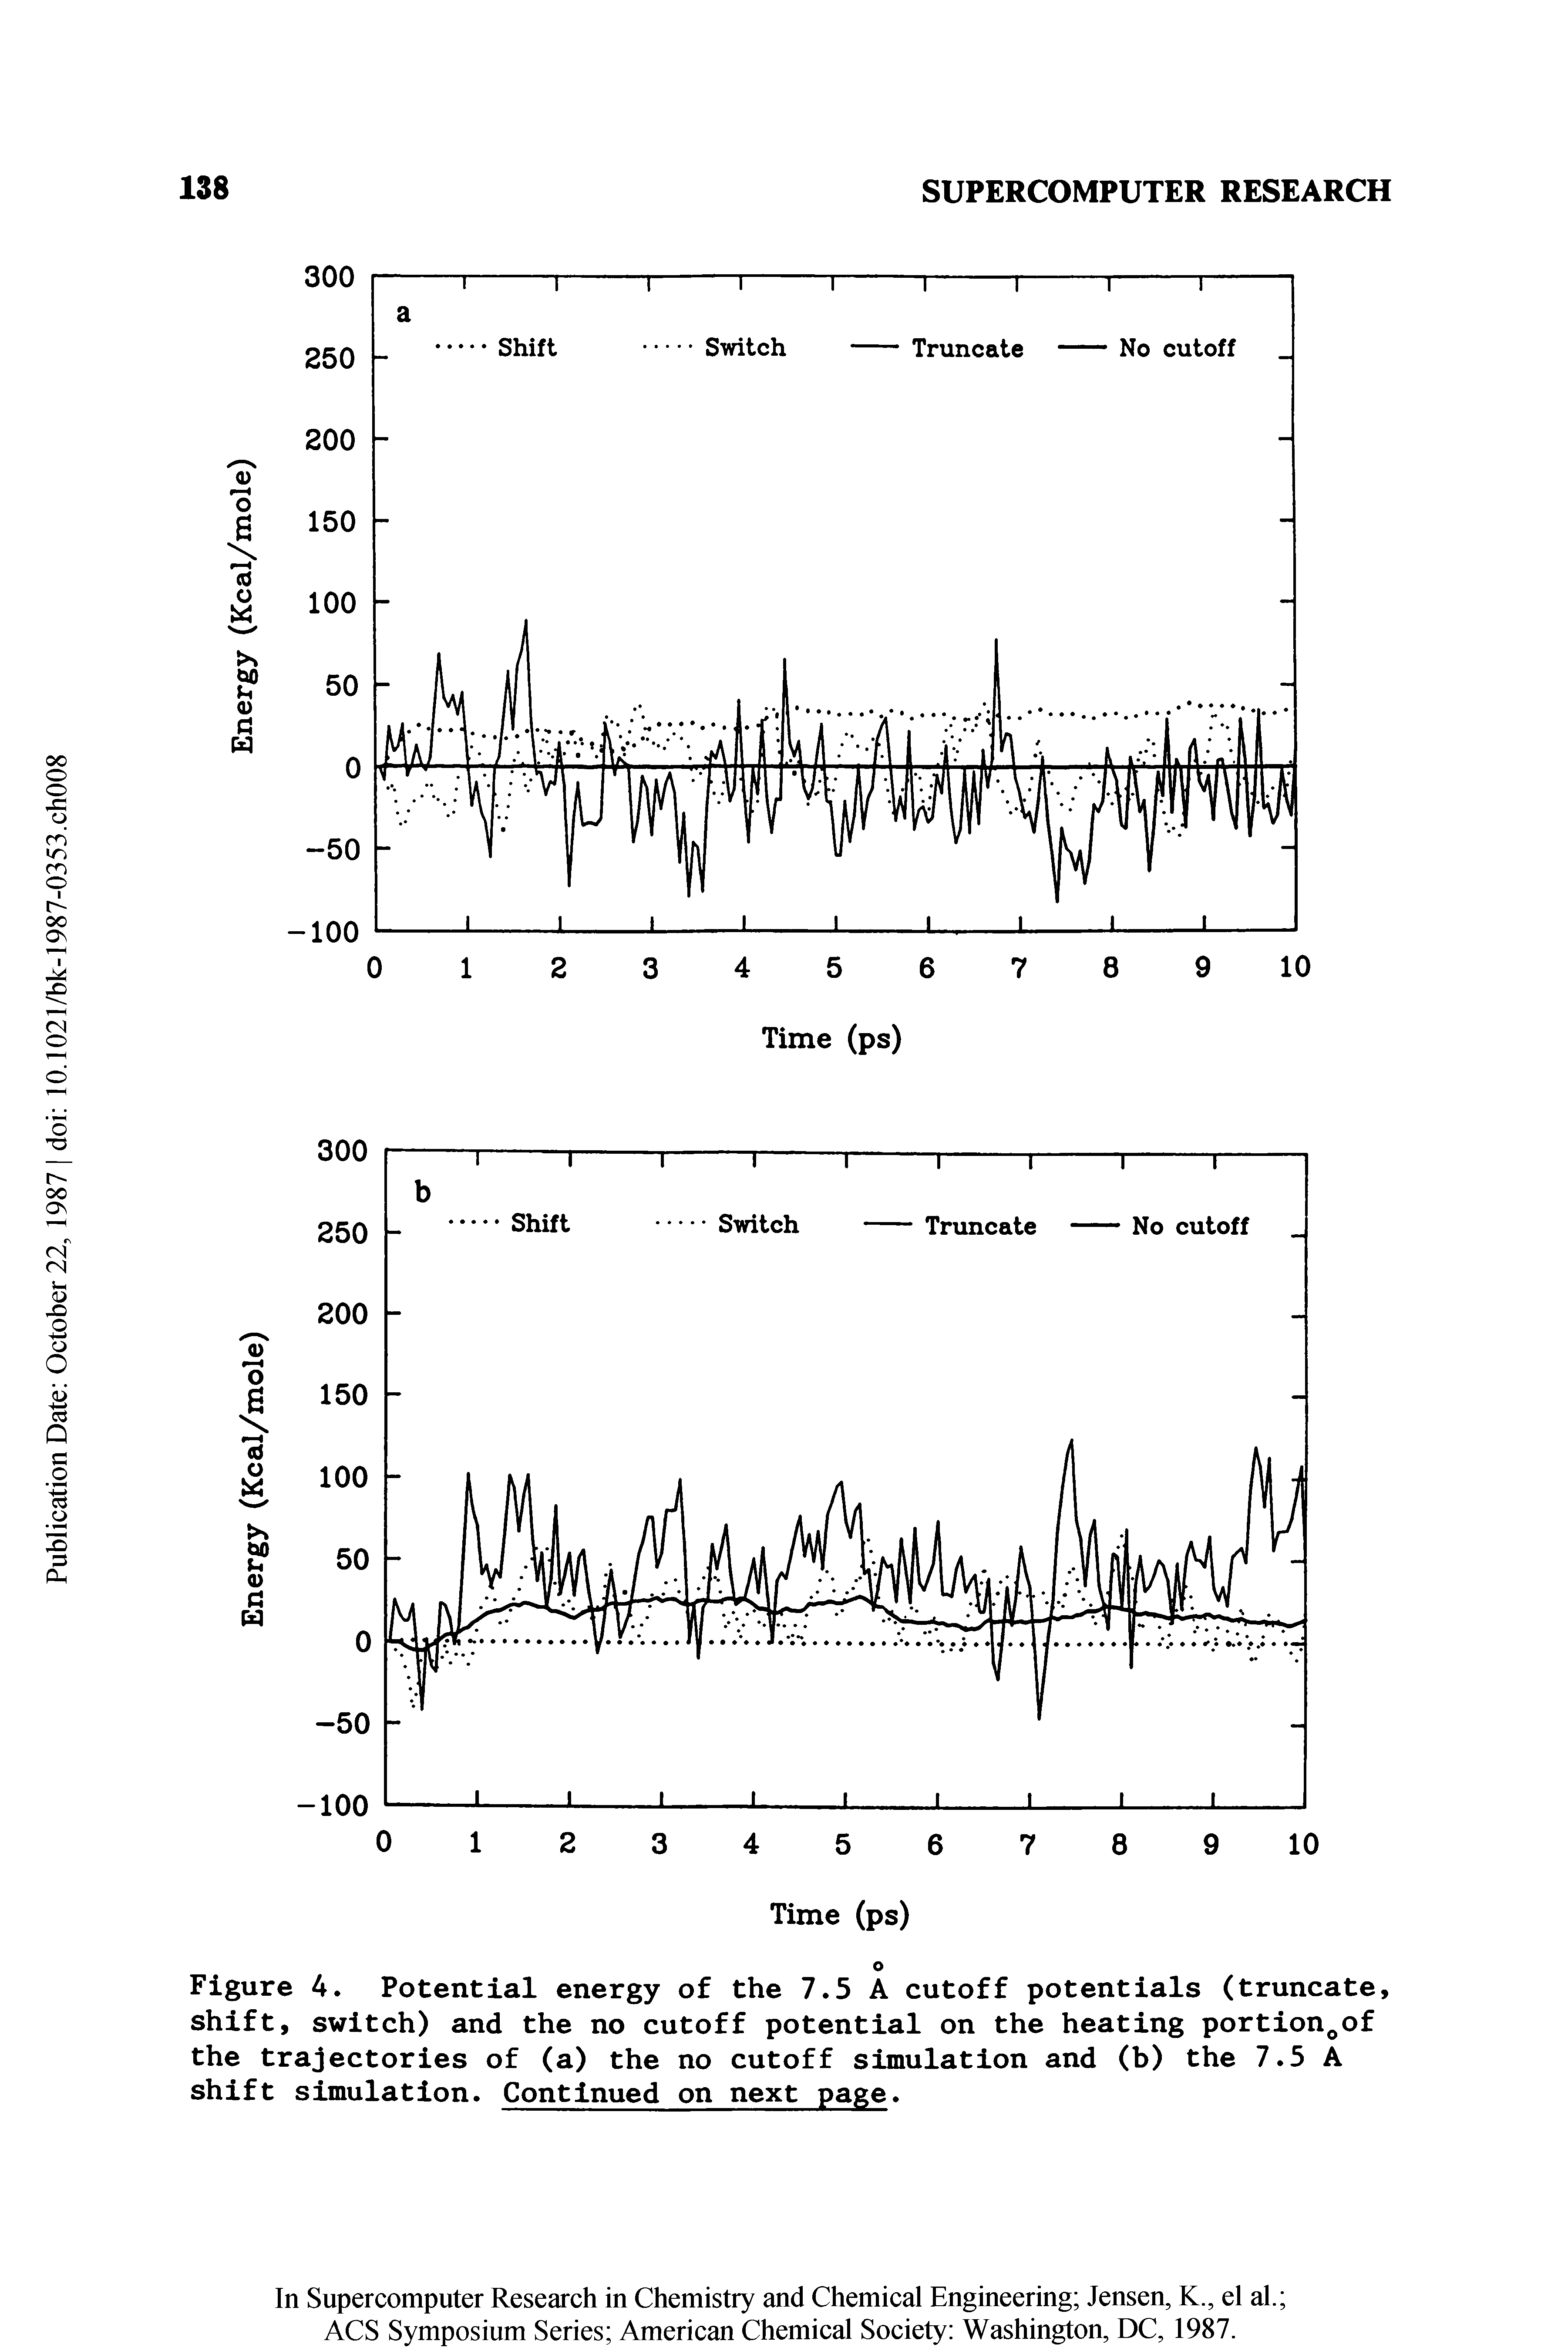 Figure 4. Potential energy of the 7.5 A cutoff potentials (truncate, shift, switch) and the no cutoff potential on the heating portion of the trajectories of (a) the no cutoff simulation and (b) the 7.5 A shift simulation. Continued on next page.